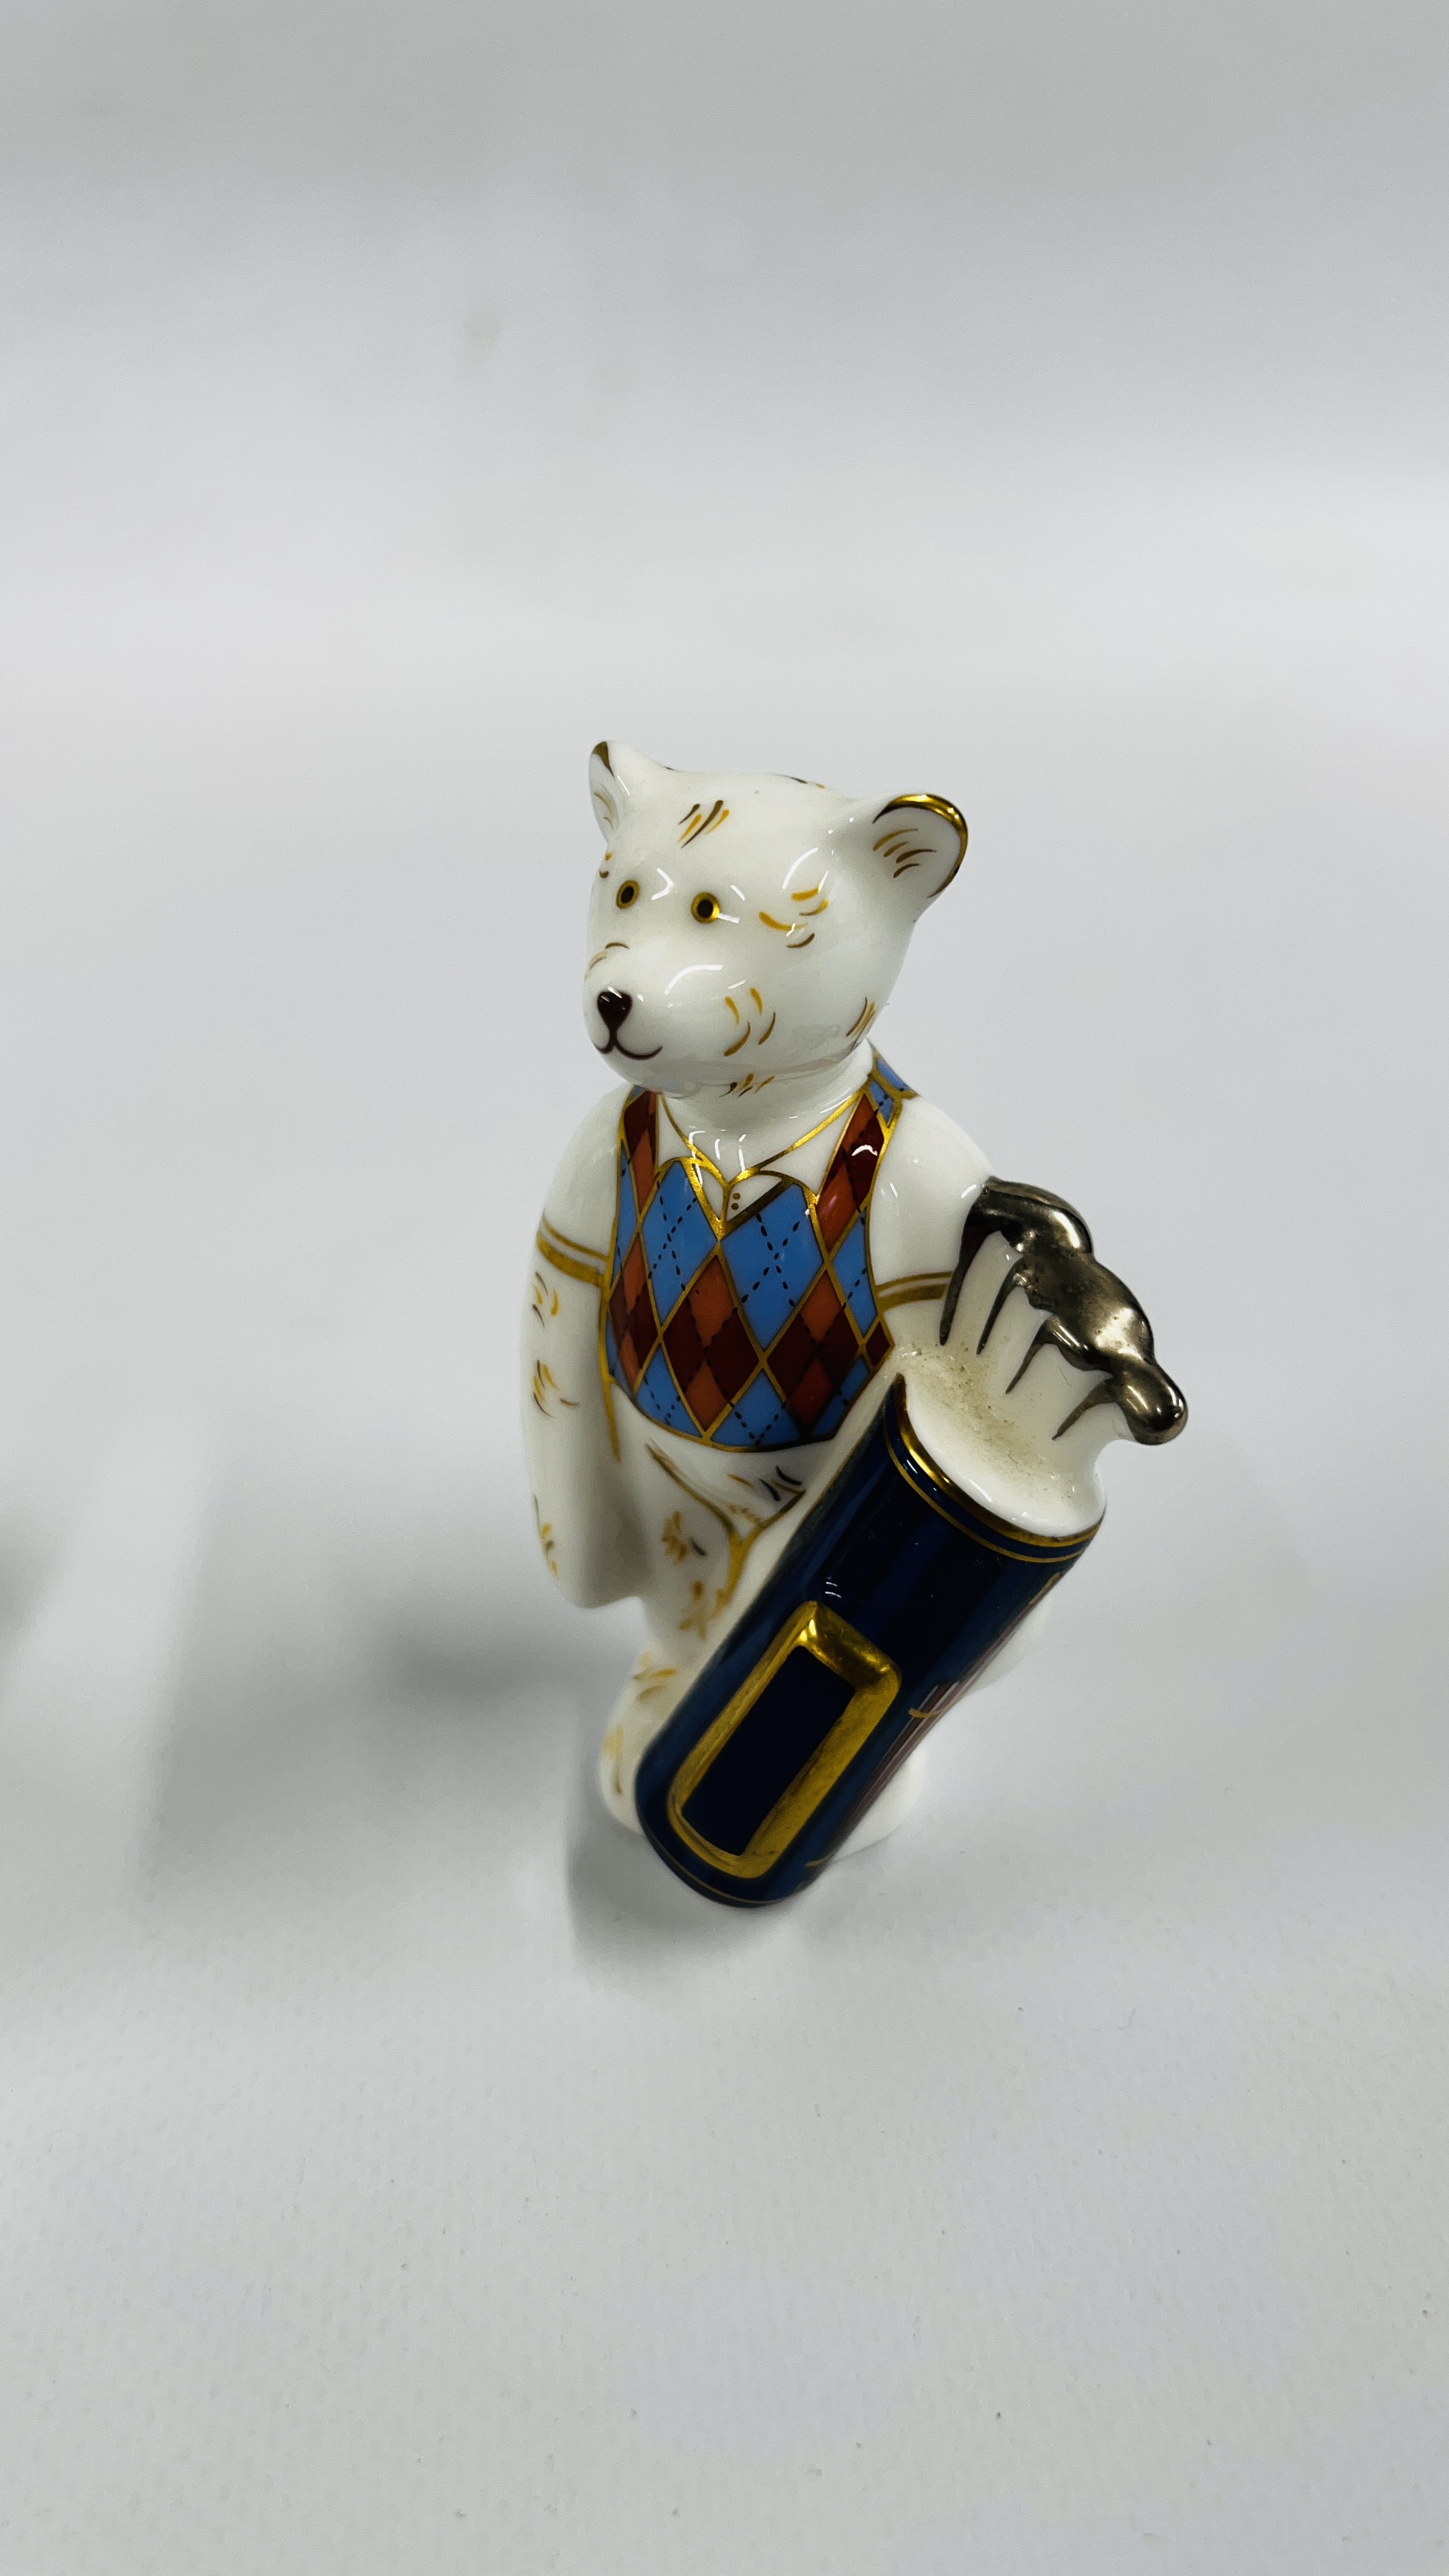 2 ROYAL CROWN DERBY FIGURES TO INCLUDE "GRADUATE" H 7CM AND GOLFER BEAR H 9CM NO STOPPERS. - Image 5 of 8